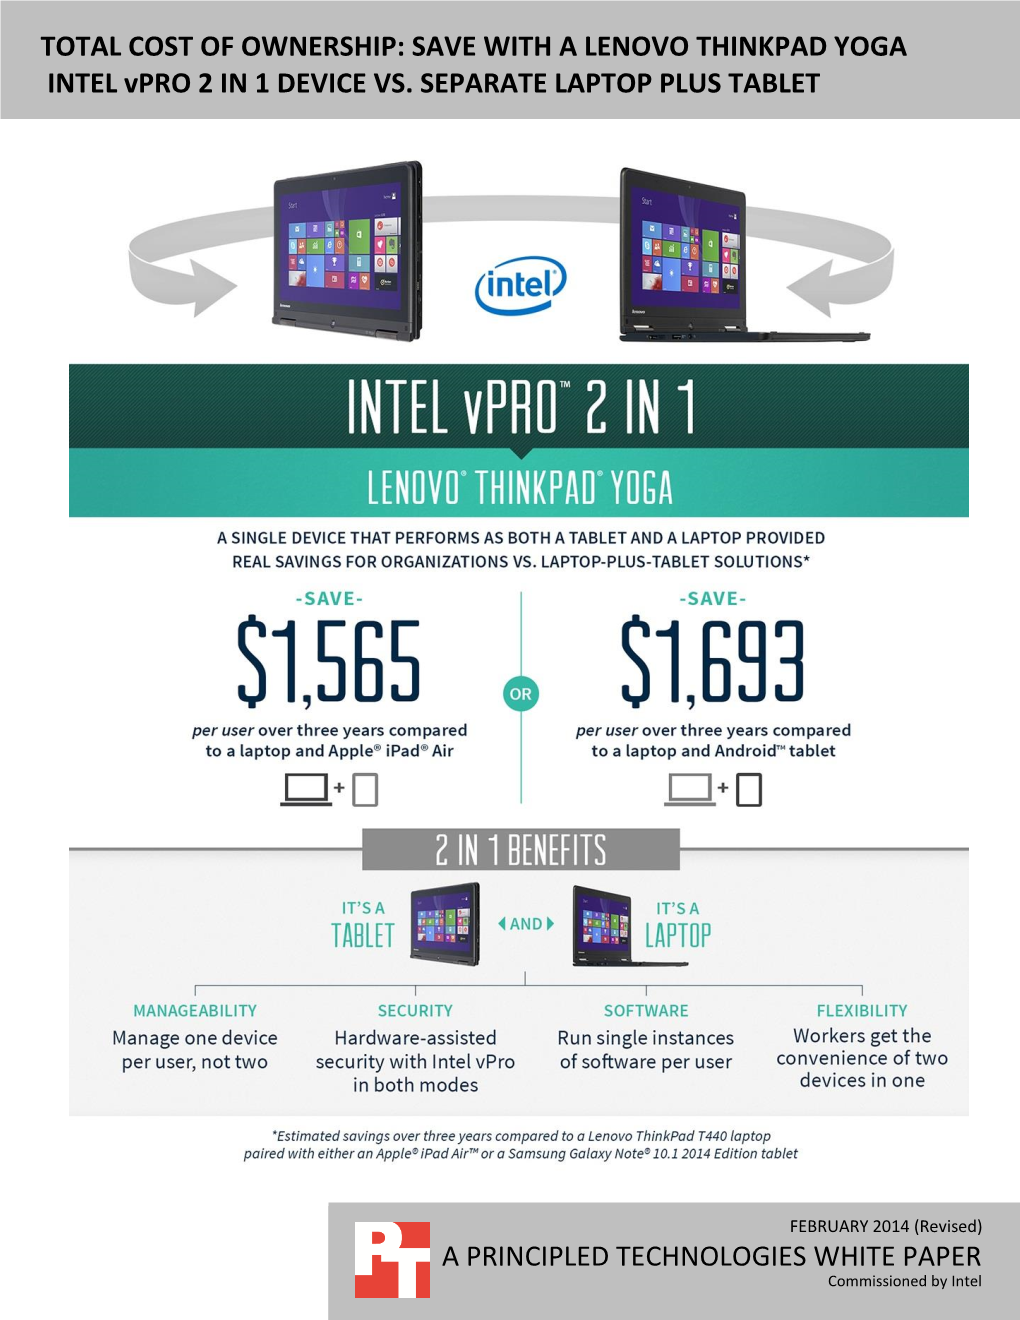 Total Cost of Ownership: Save with a Lenovo Thinkpad Yoga 2 in 1 Intel